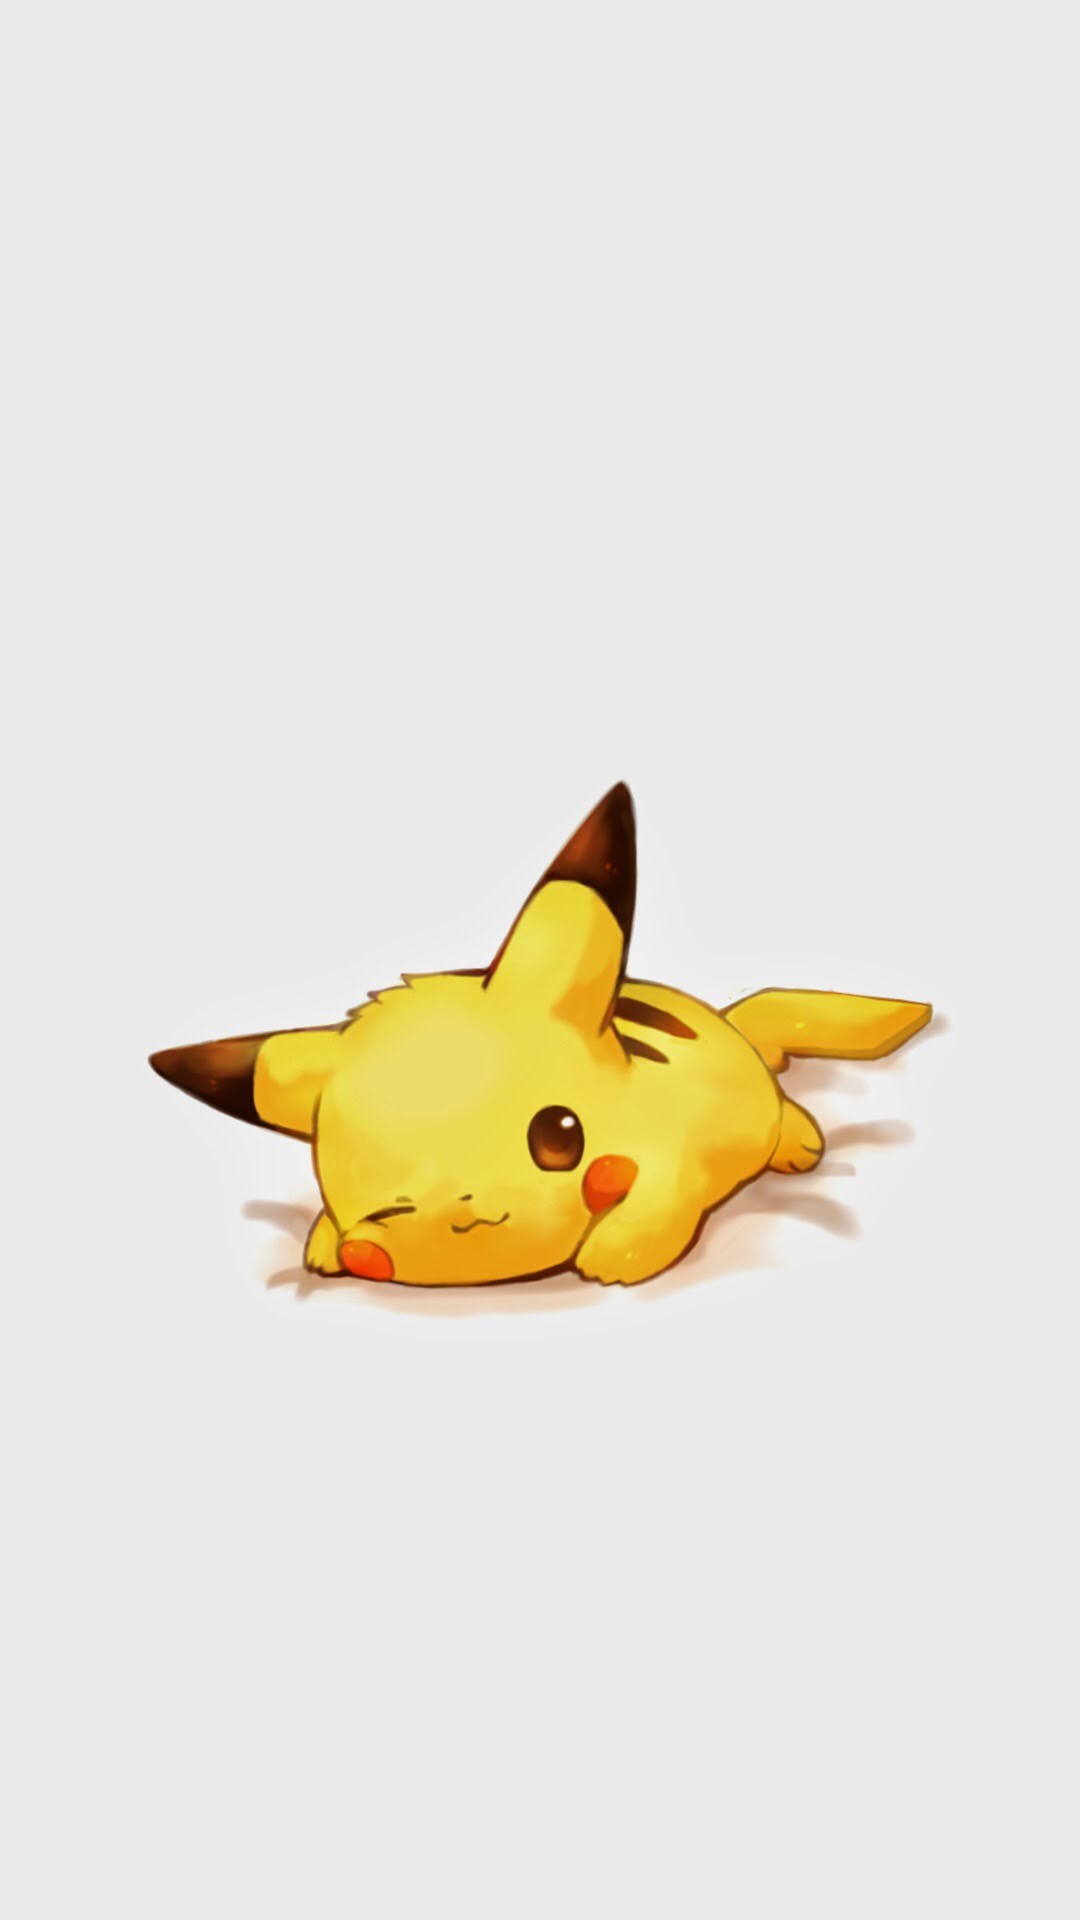 Tap image for more funny cute Pikachu wallpaper Pikachu – mobile9 Wallpapers for